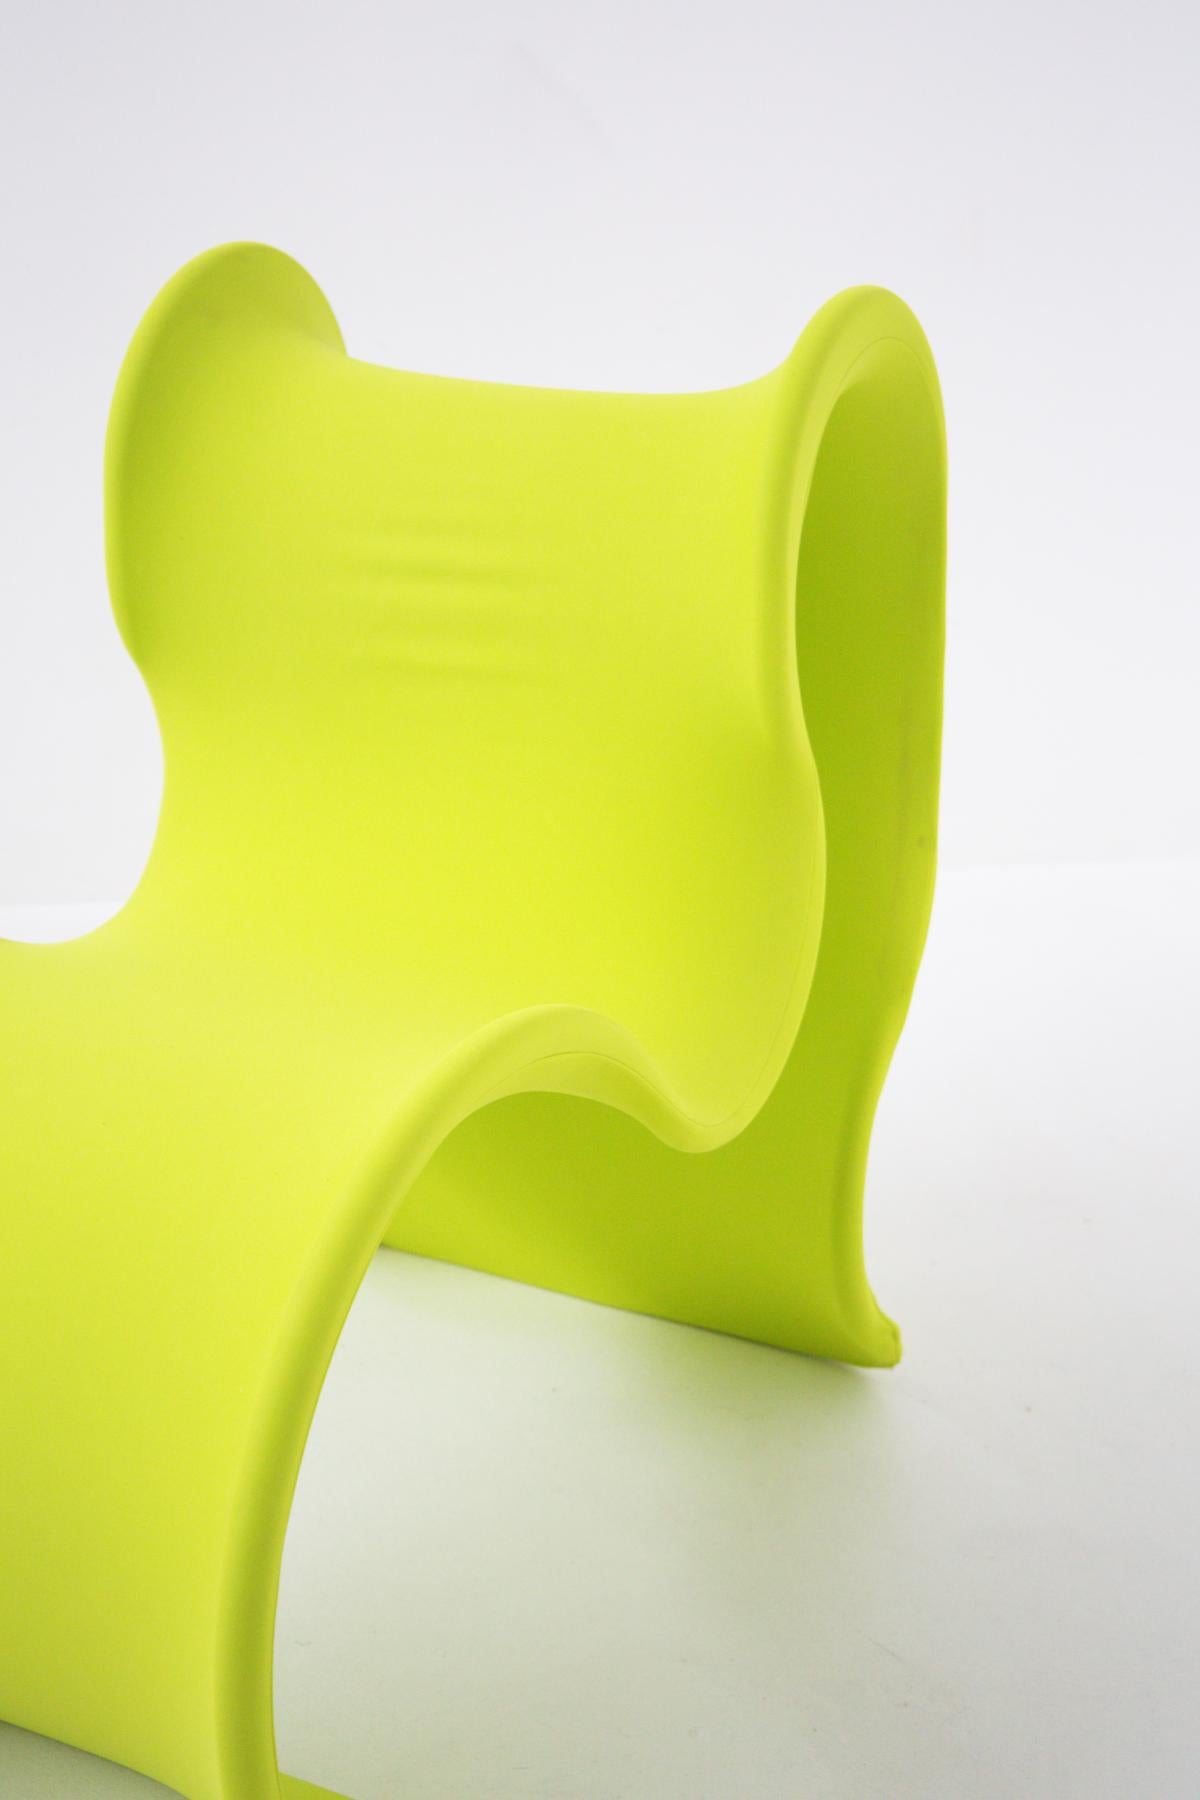 Gianni Pareschi Armchair Fiocco Acid Green for Busnelli For Sale 8